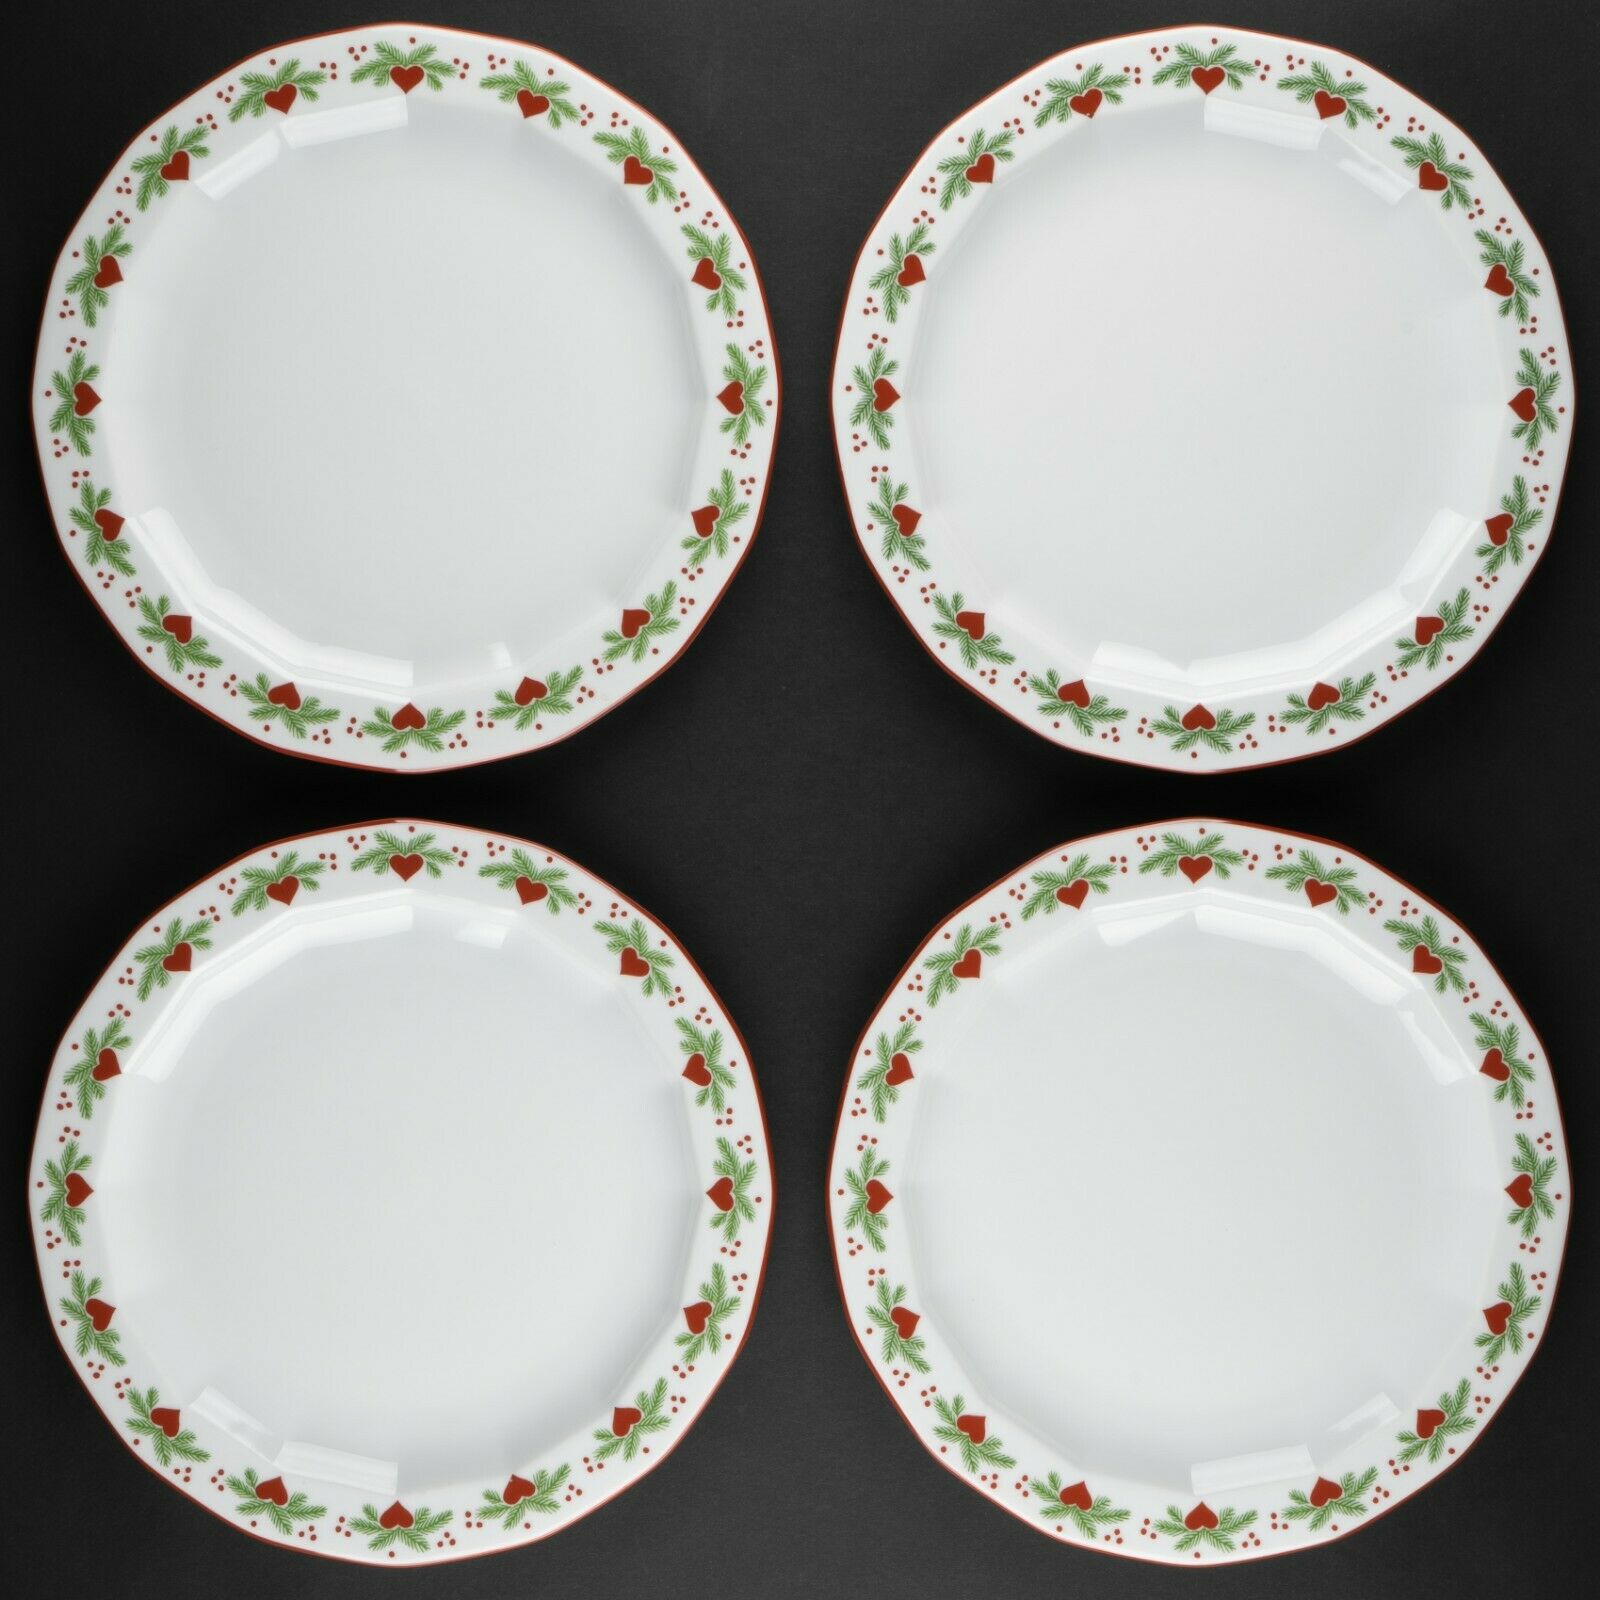 Set Of 4 Dinner Plates #1 | Multisided Hearts & Pines By Porsgrund Of Norway